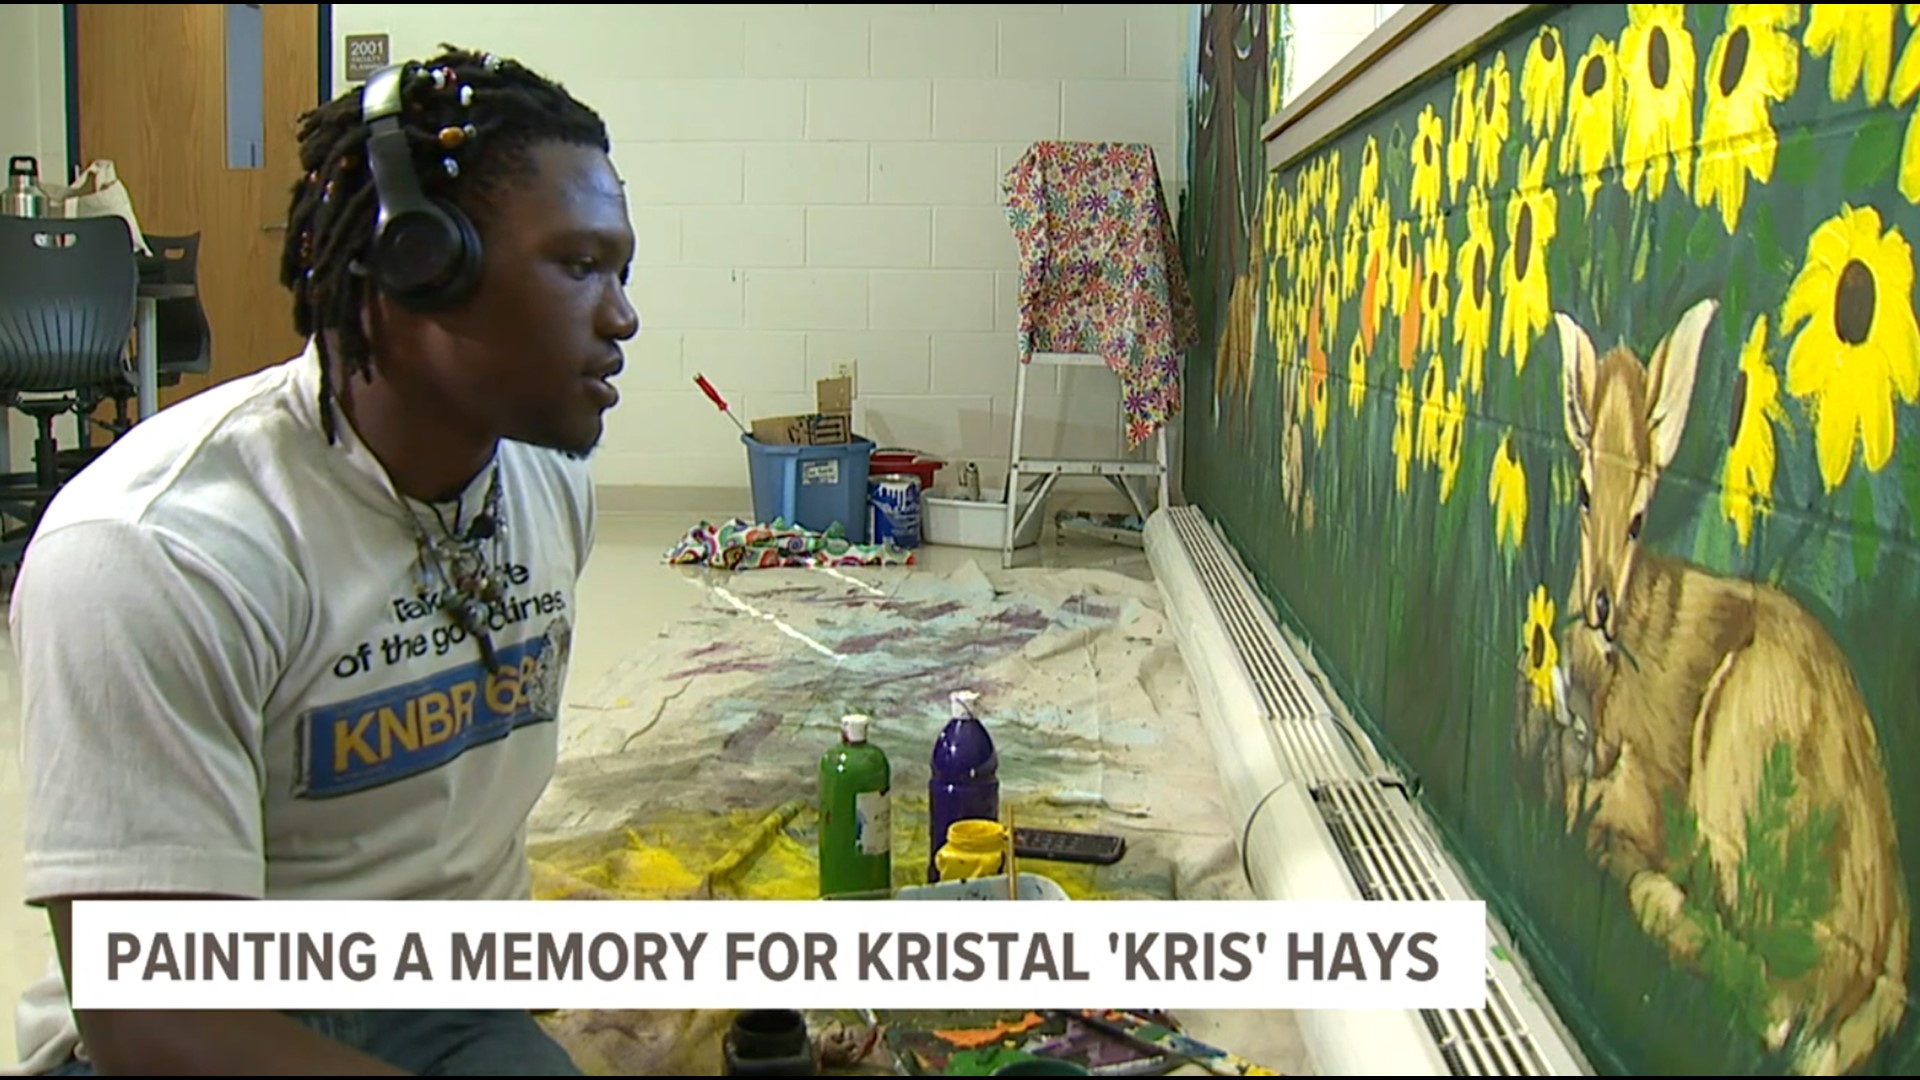 For more than 20 years, Kristal “Kris” Hays was a RIMSD teacher. After she passed away from cancer, her friends asked a local student to paint a mural in her honor.